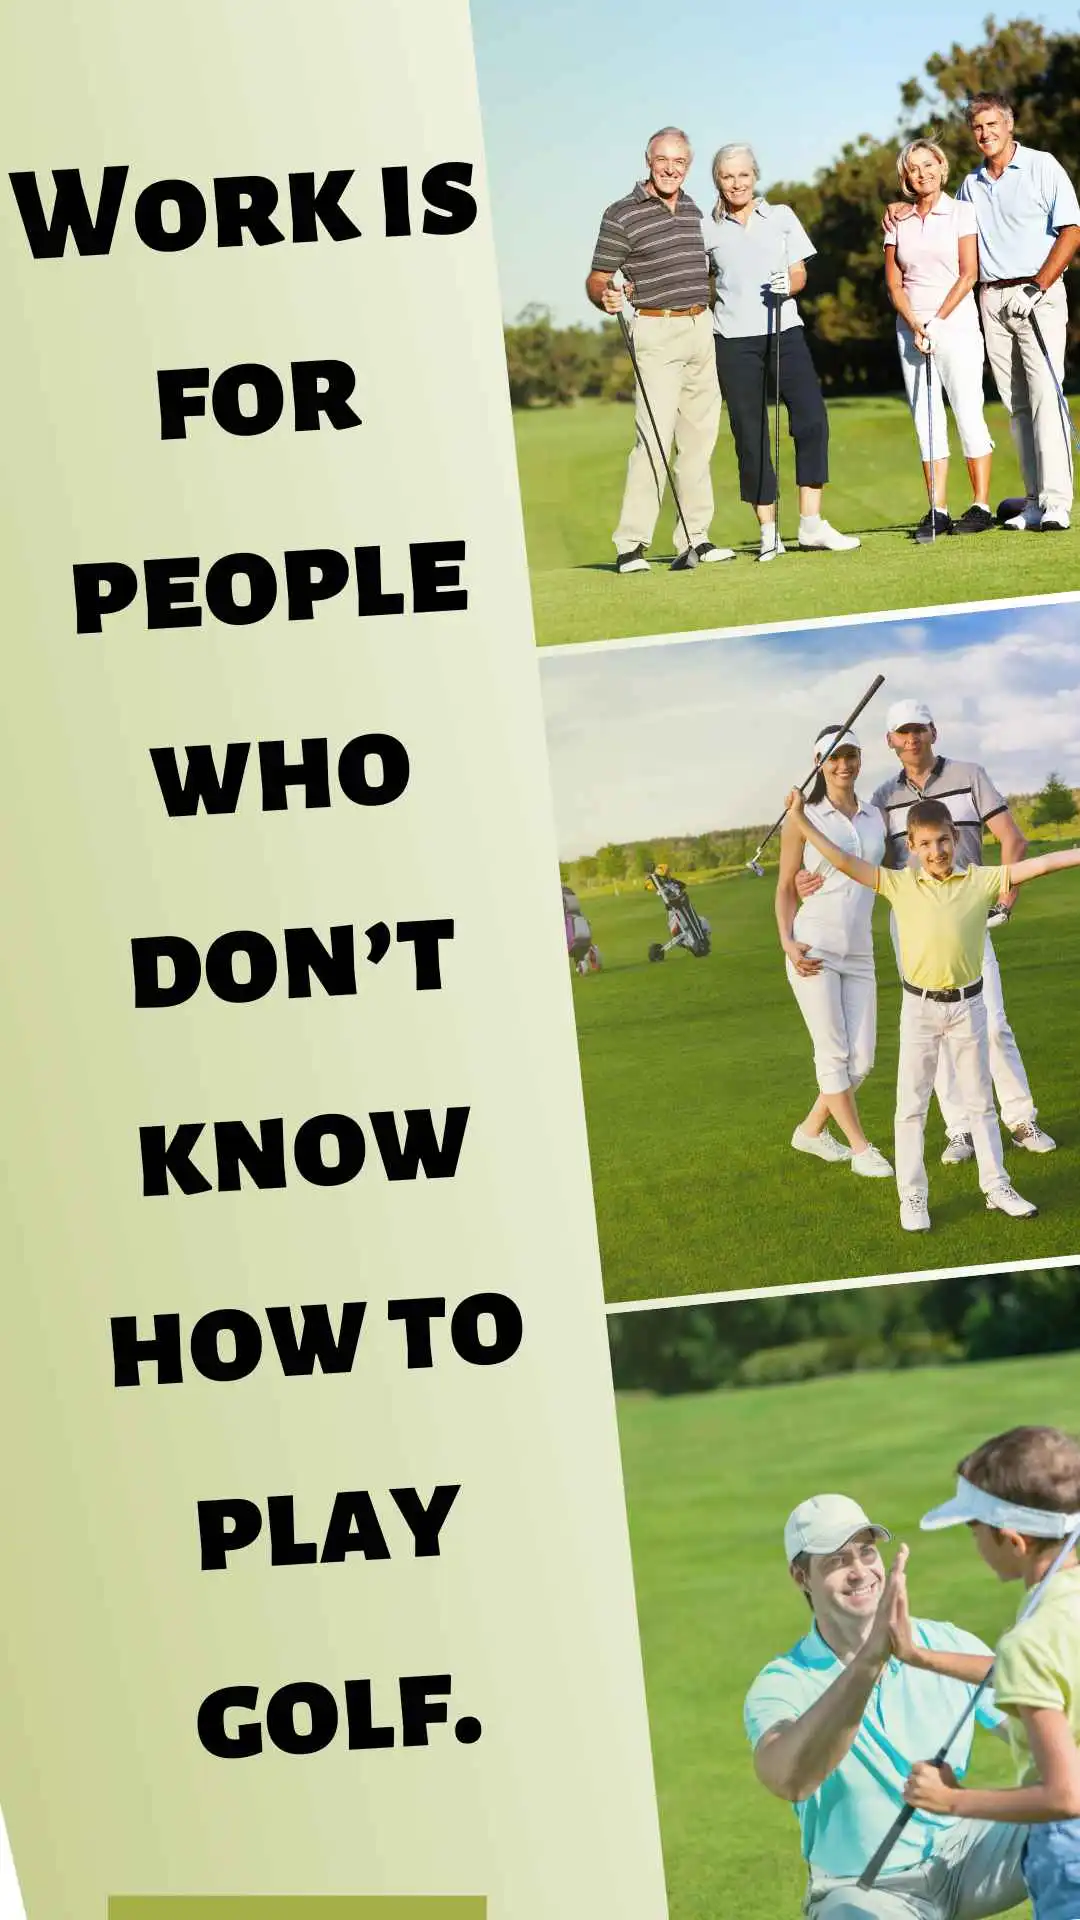 Work is for people who don’t know how to play golf.